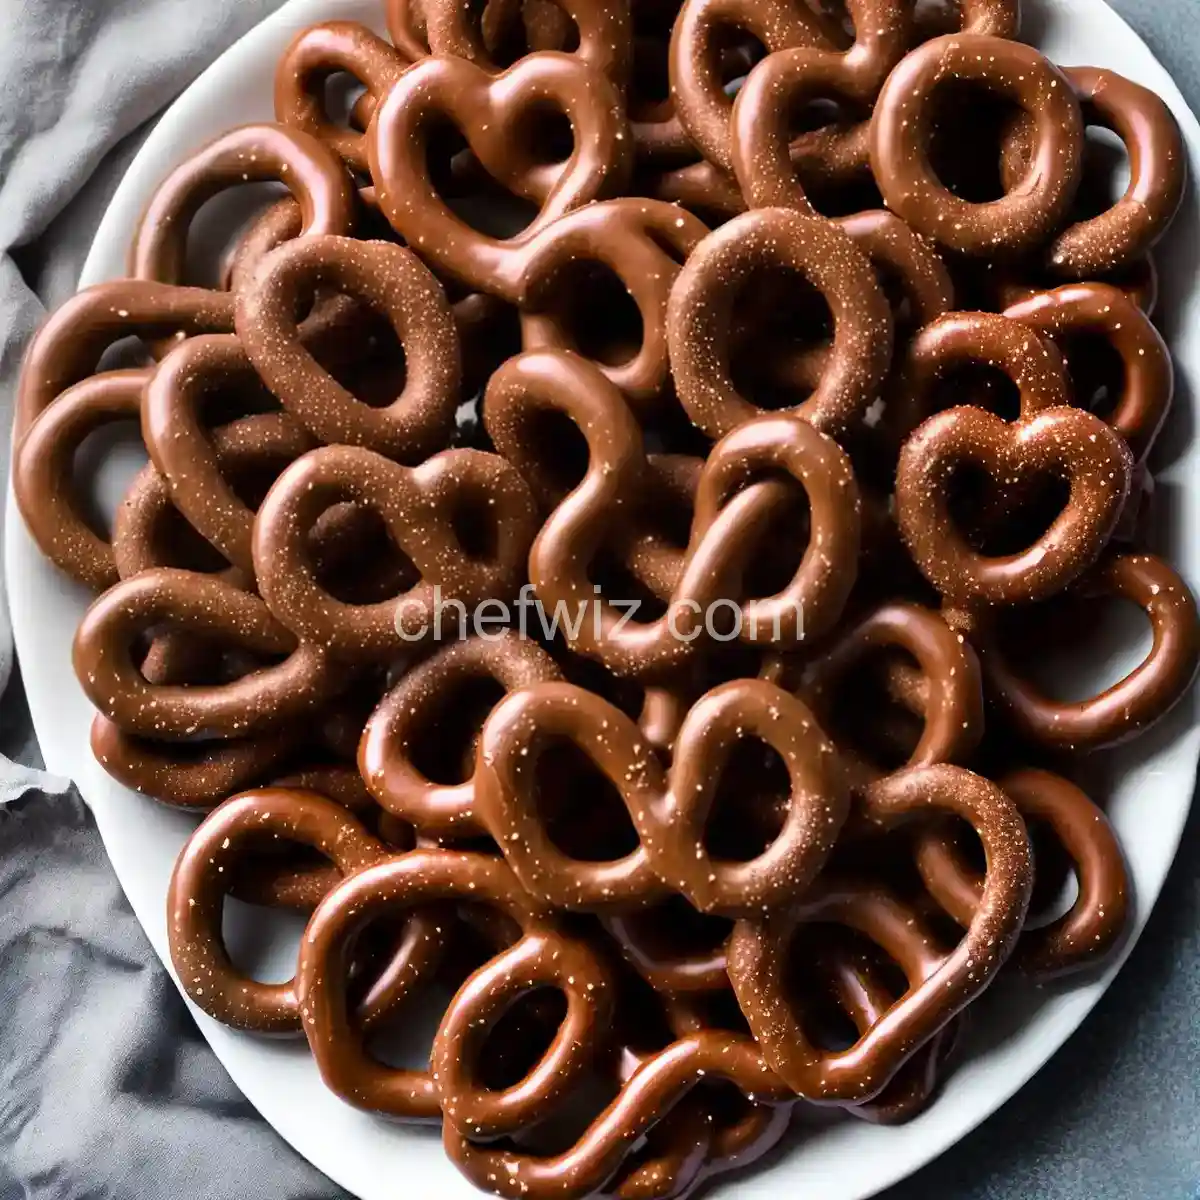 Chocolate Covered Pretzels Recipes Food Cooking Eating Dinner Ideas 